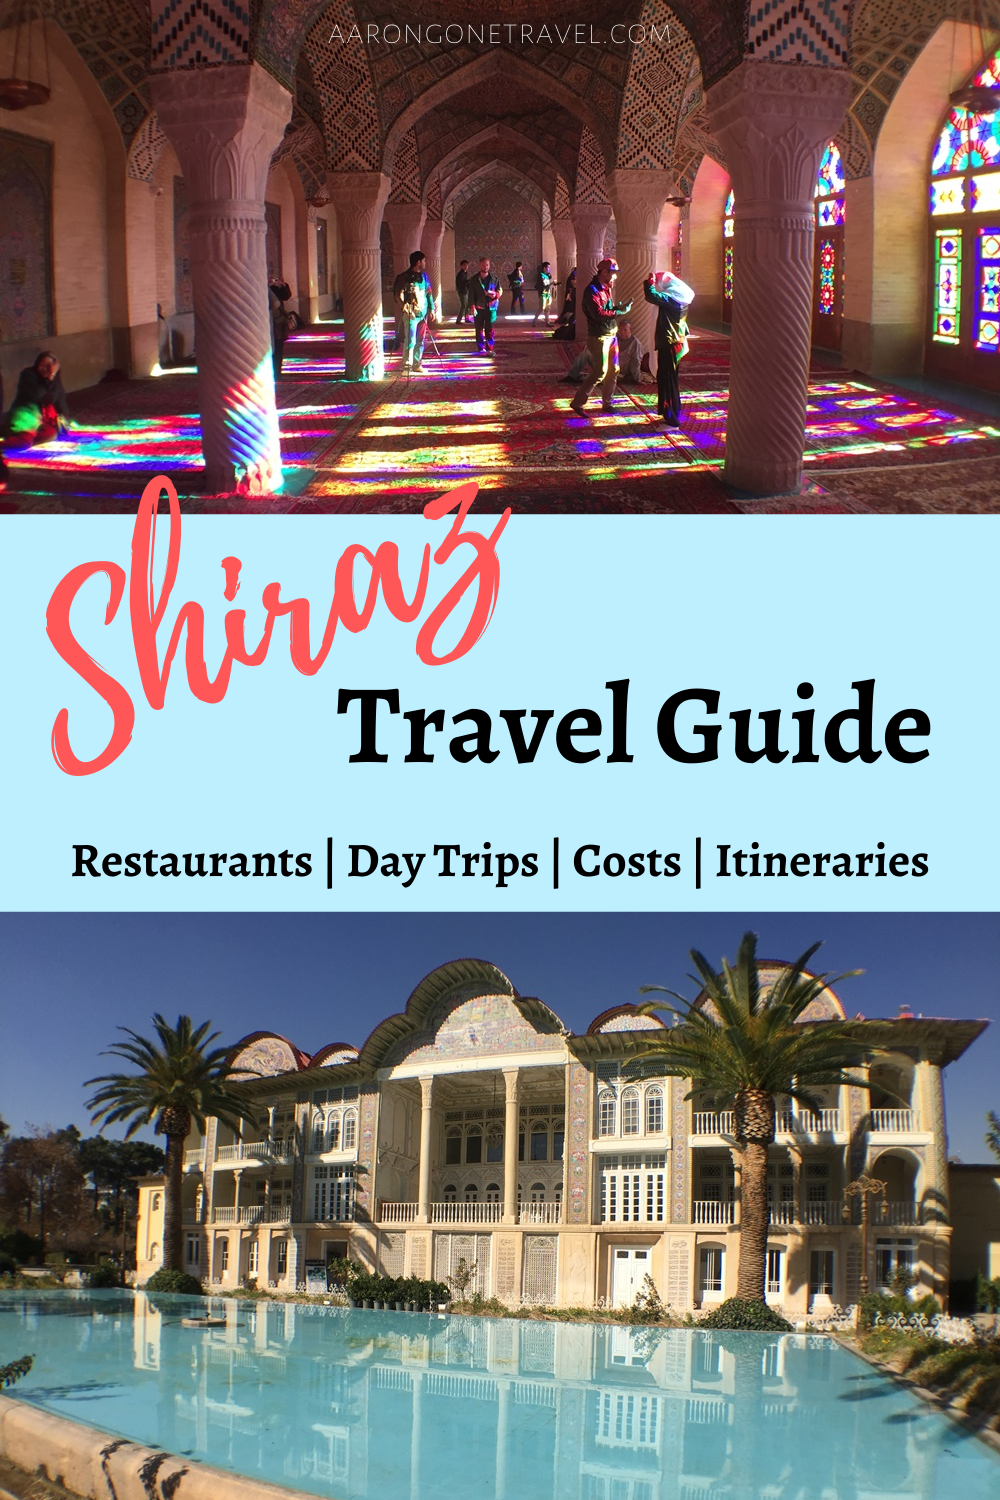 Going to Shiraz soon? Make sure you check this ultimate Shiraz Travel Guide out! This travel guide carefully curates all the top attractions in Shiraz, best restaurants in Shiraz, day trips in Shiraz and the cost of travel in Shiraz. #shiraziran #irantravel #shiraztravelguide #iran #shiraz